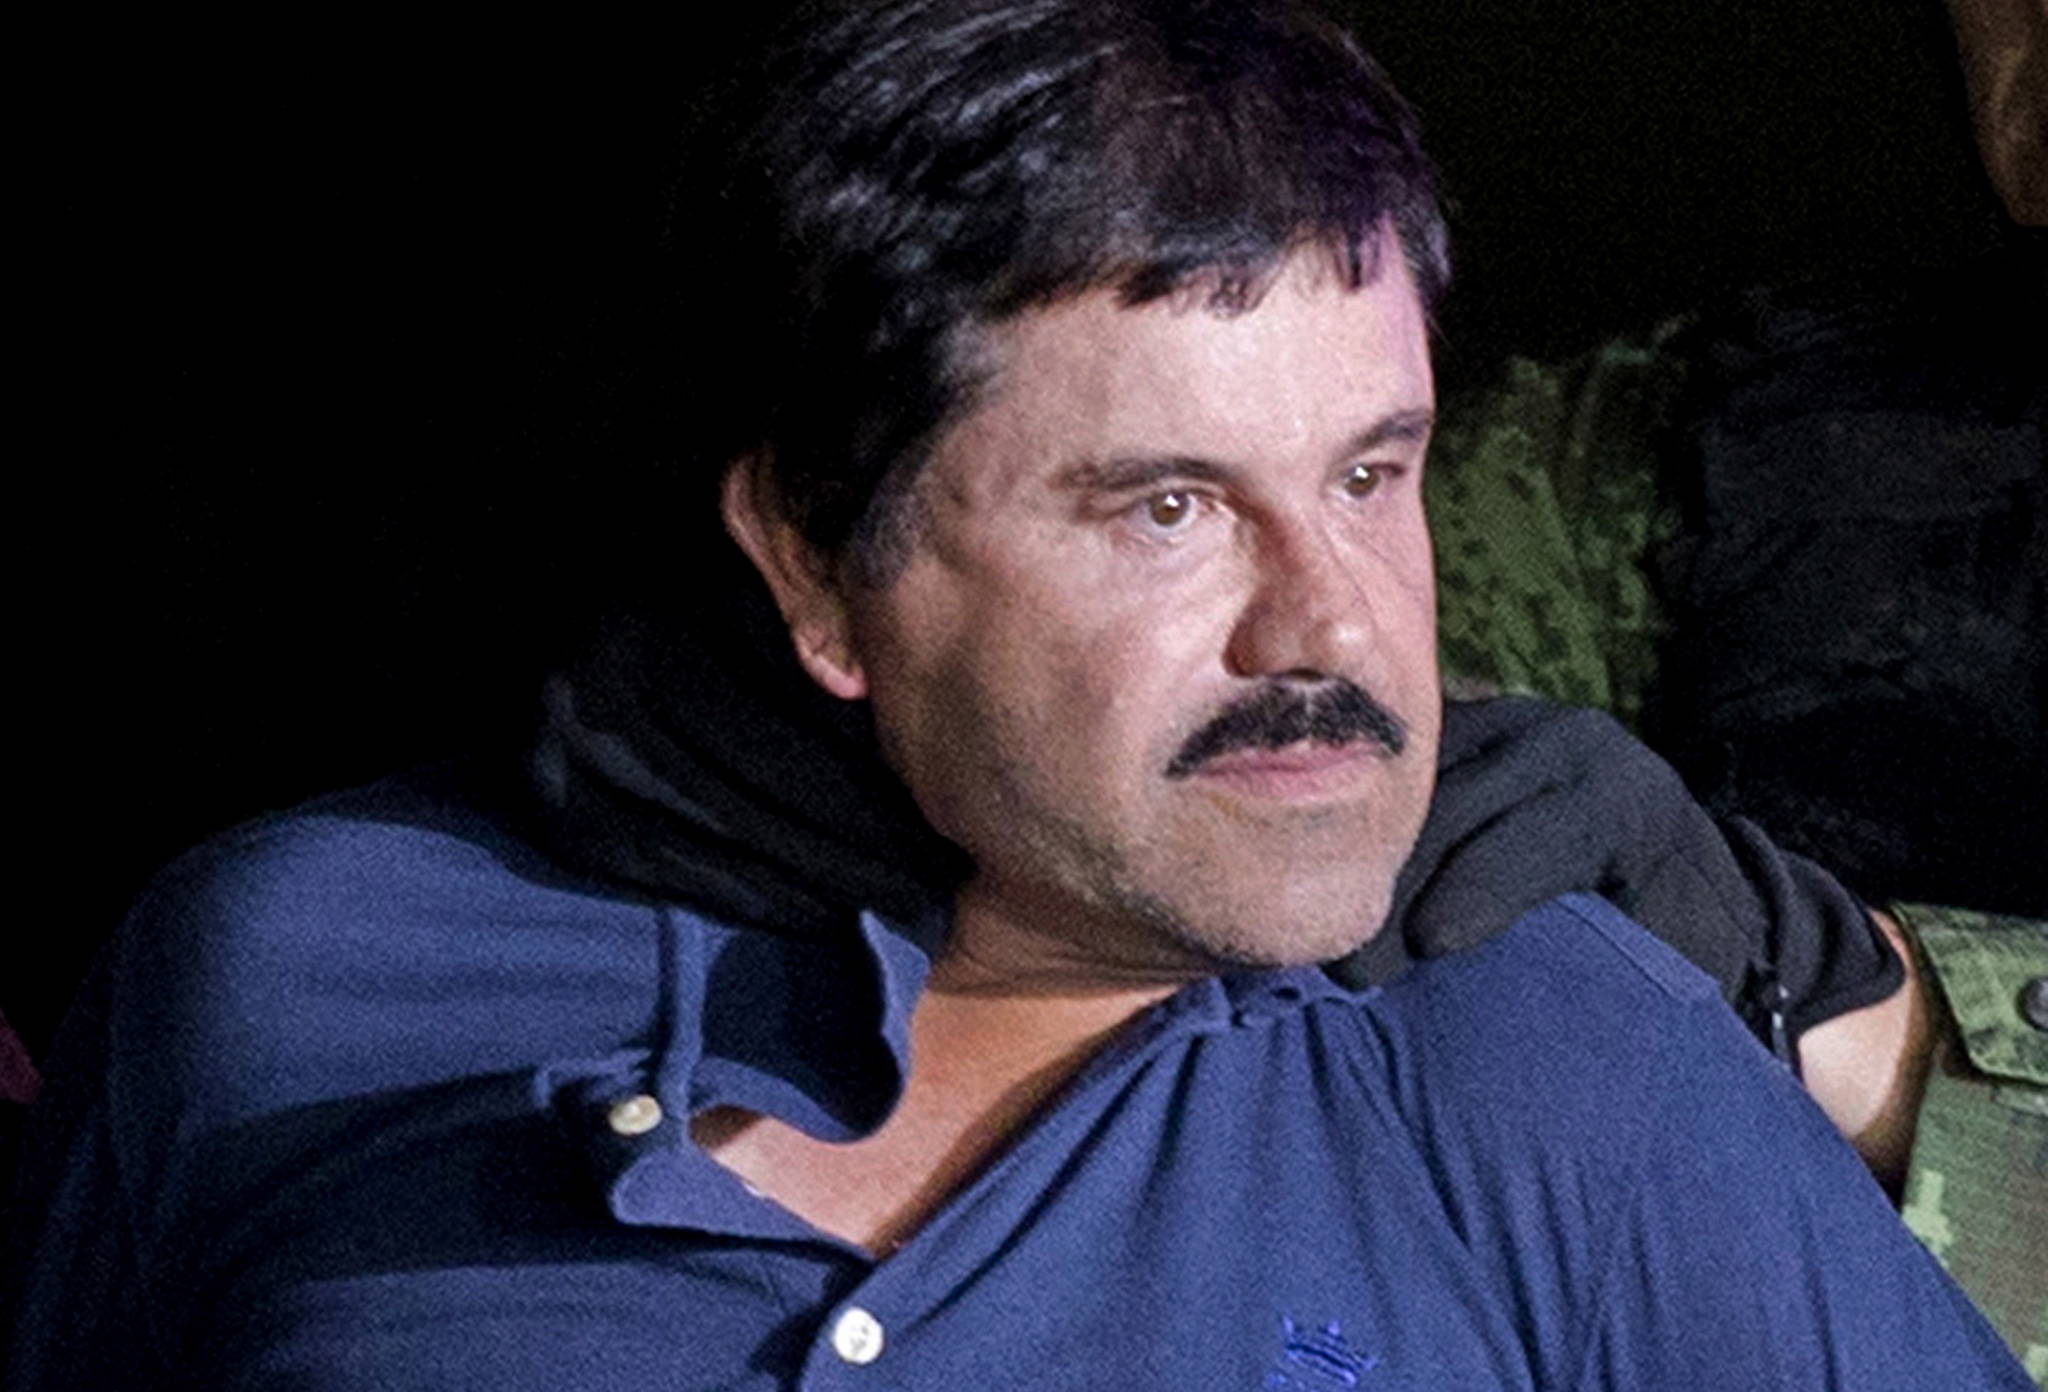 In this Jan. 8, 2016 file photo, drug lord Joaquin “El Chapo” Guzman is made to face the media in Mexico City as he is escorted by Mexican soldiers following his recapture six months after escaping from a maximum security prison. (AP Photo/Eduardo Verdugo, File)